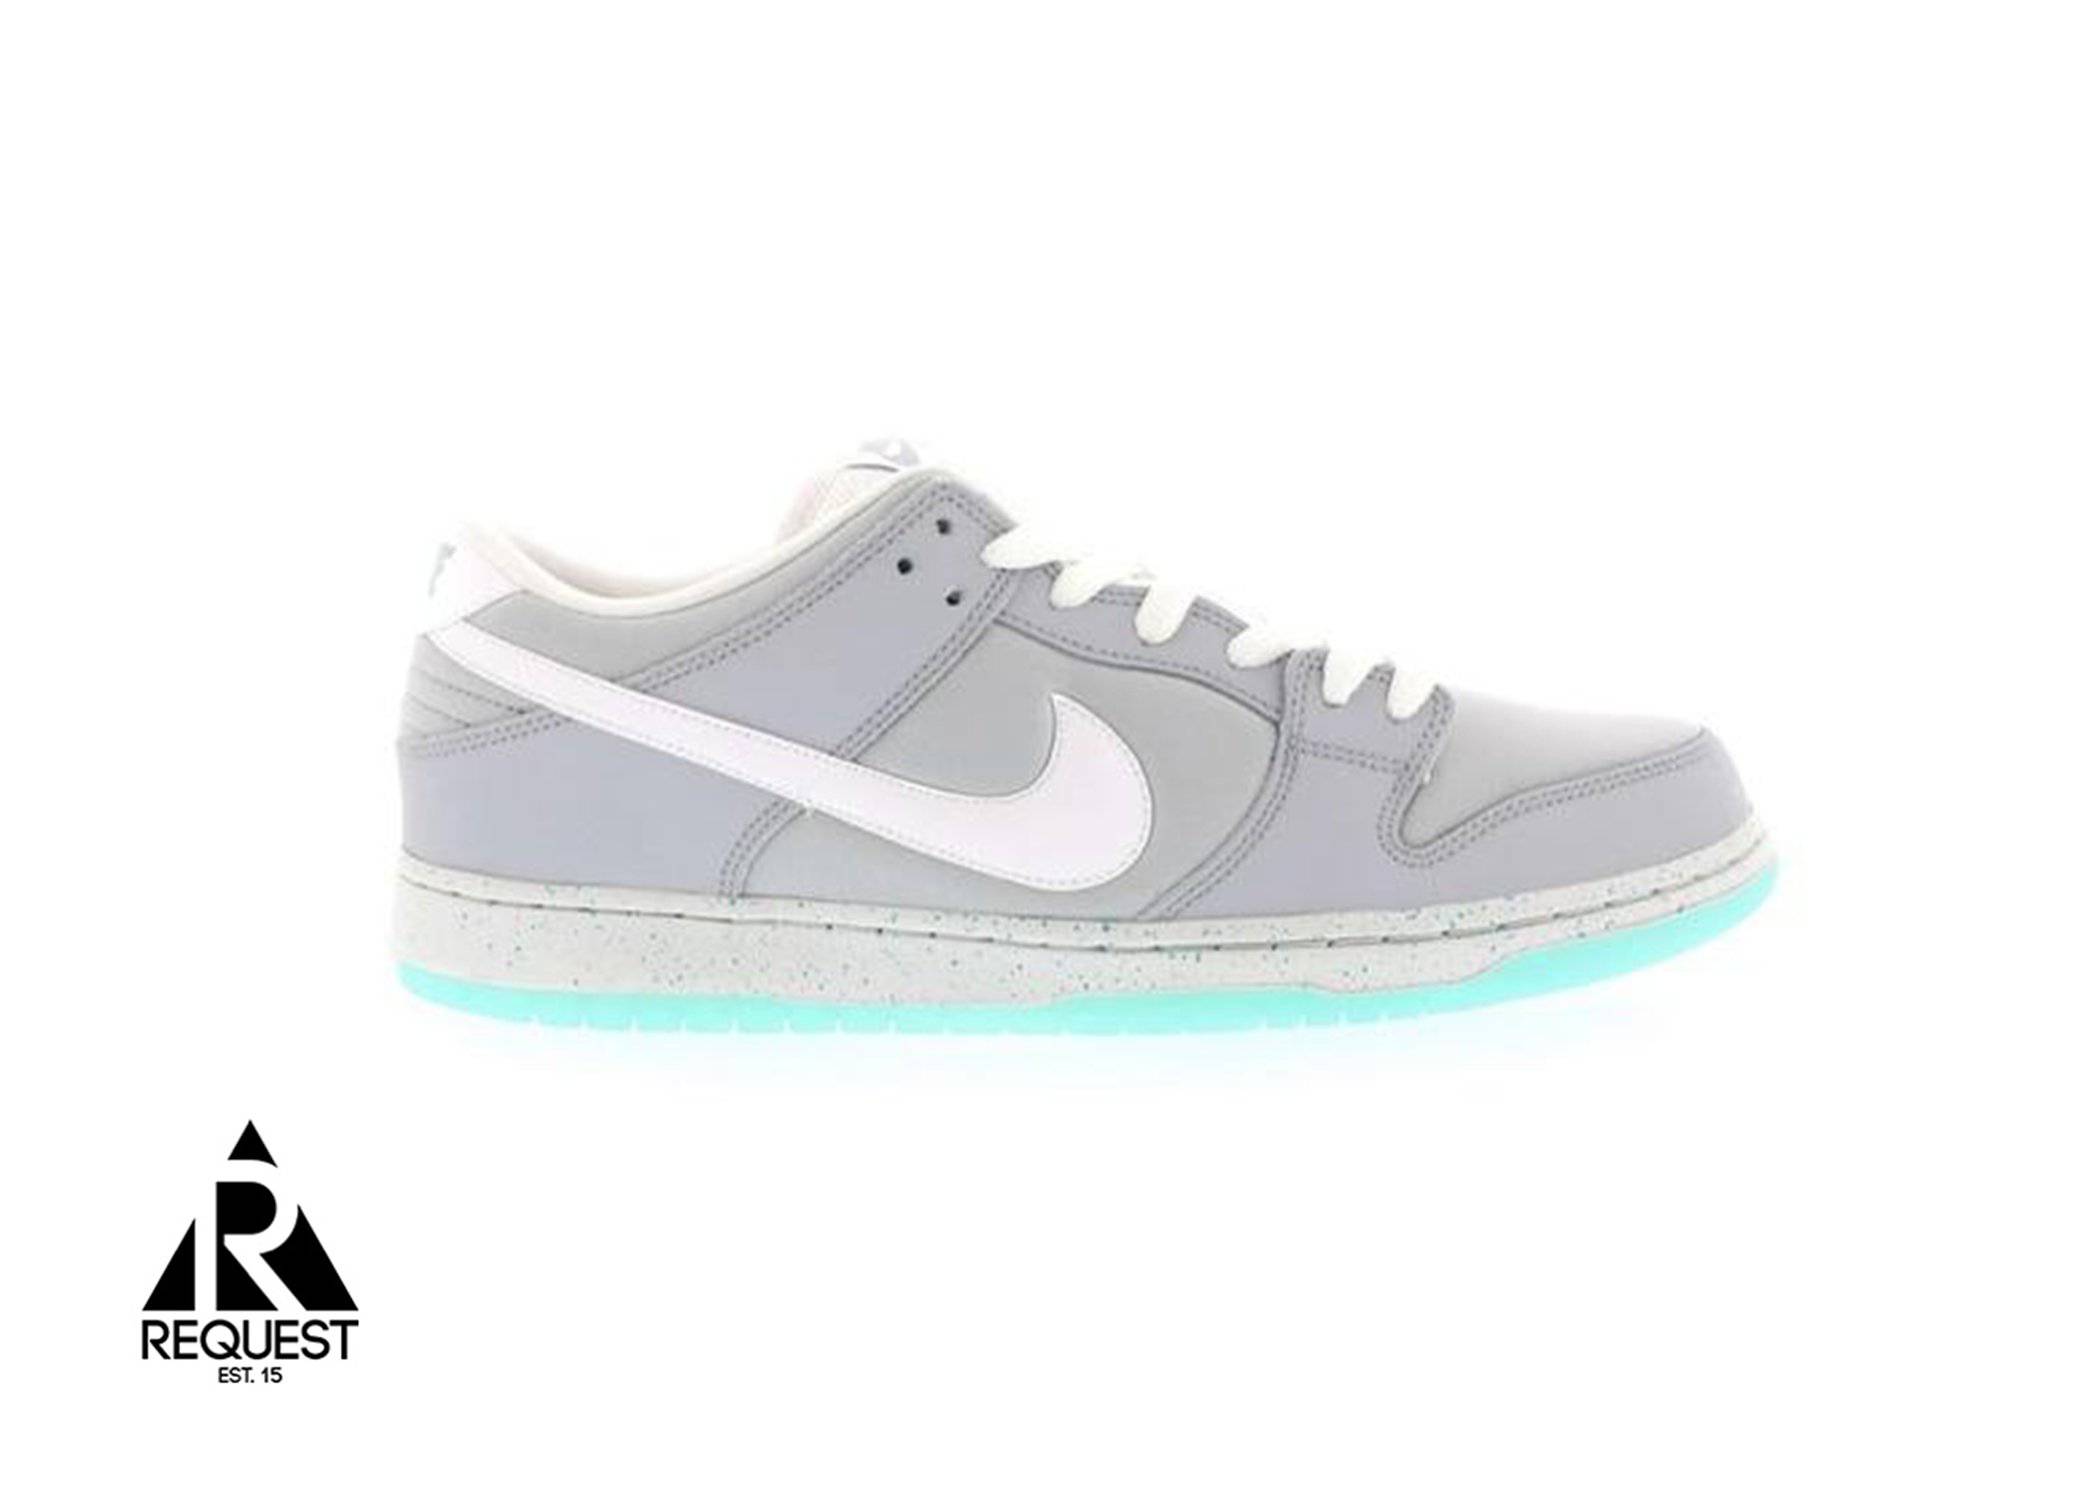 Nike SB Dunk Low “Marty McFly”